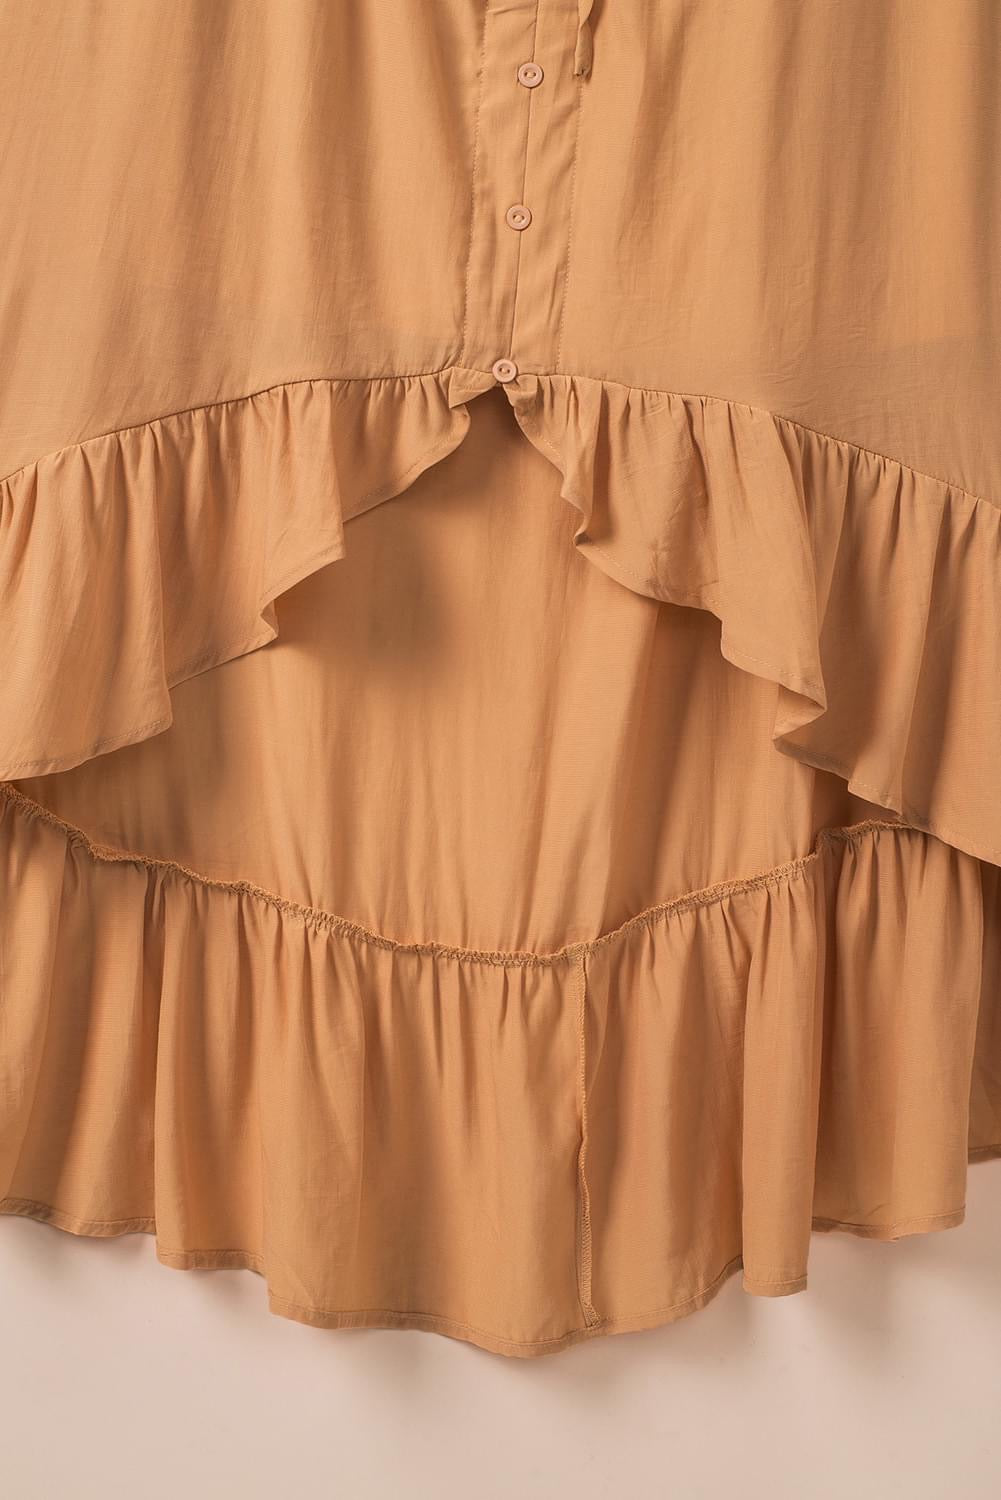 Short Sleeve High Low Dress in Apricot